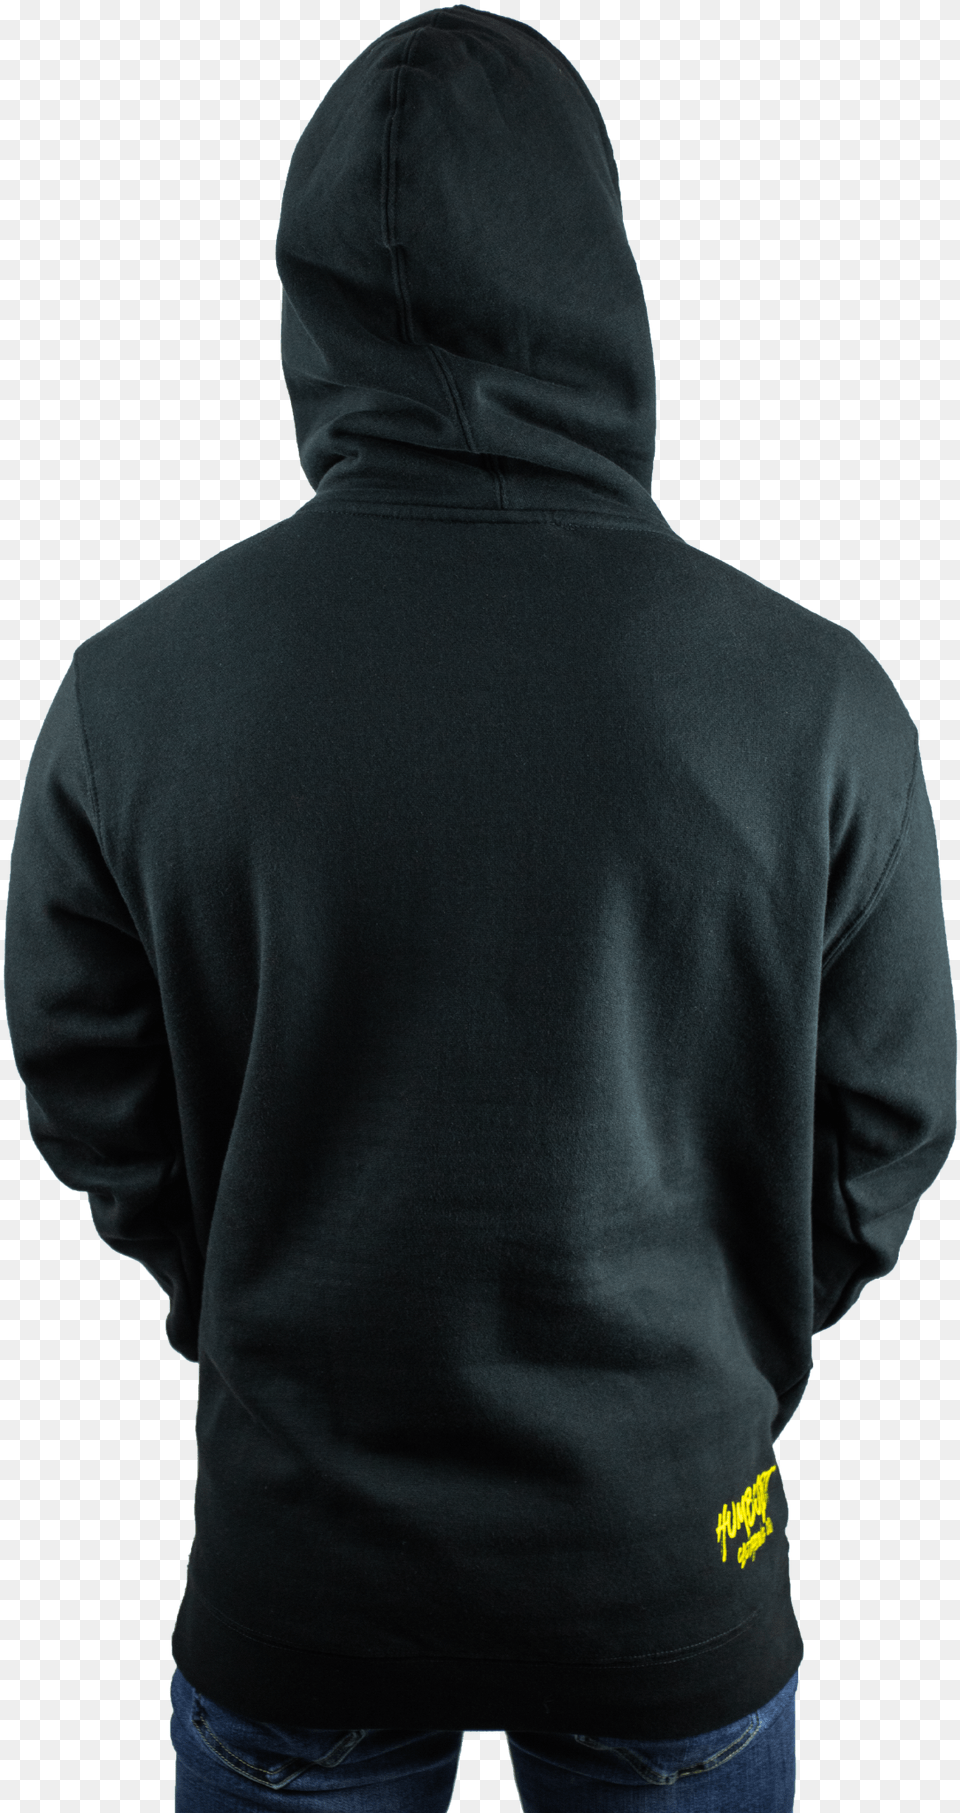 Class Lazyload Lazyload Mirage Cloudzoomstyle Width Hoodie, Clothing, Hood, Knitwear, Sweater Png Image